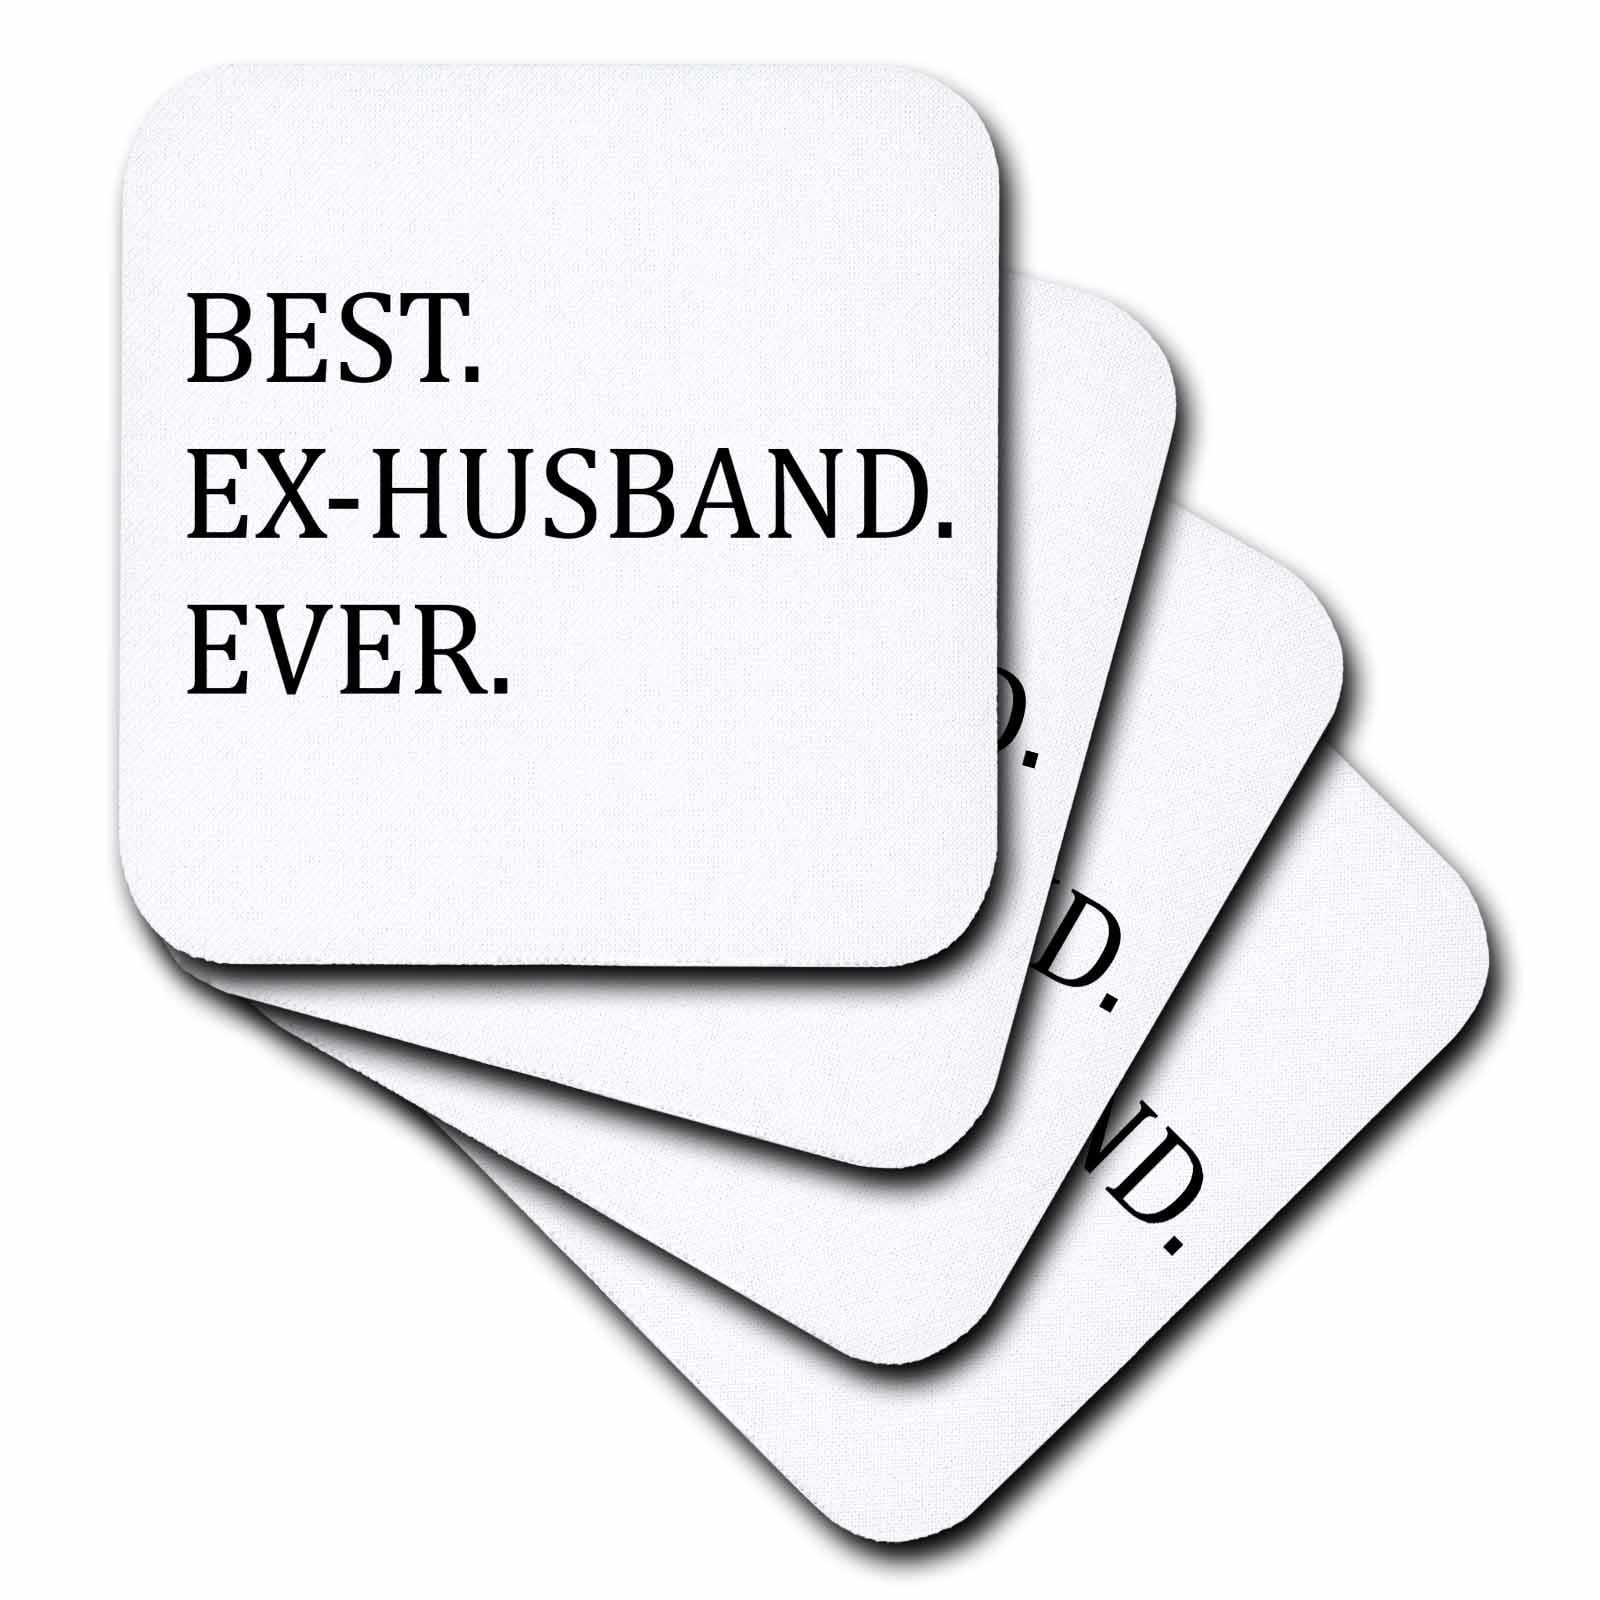 Coaster Drinks Mat Funny Witty Quote Amusing Humour Novelty Cheap Present Gift 